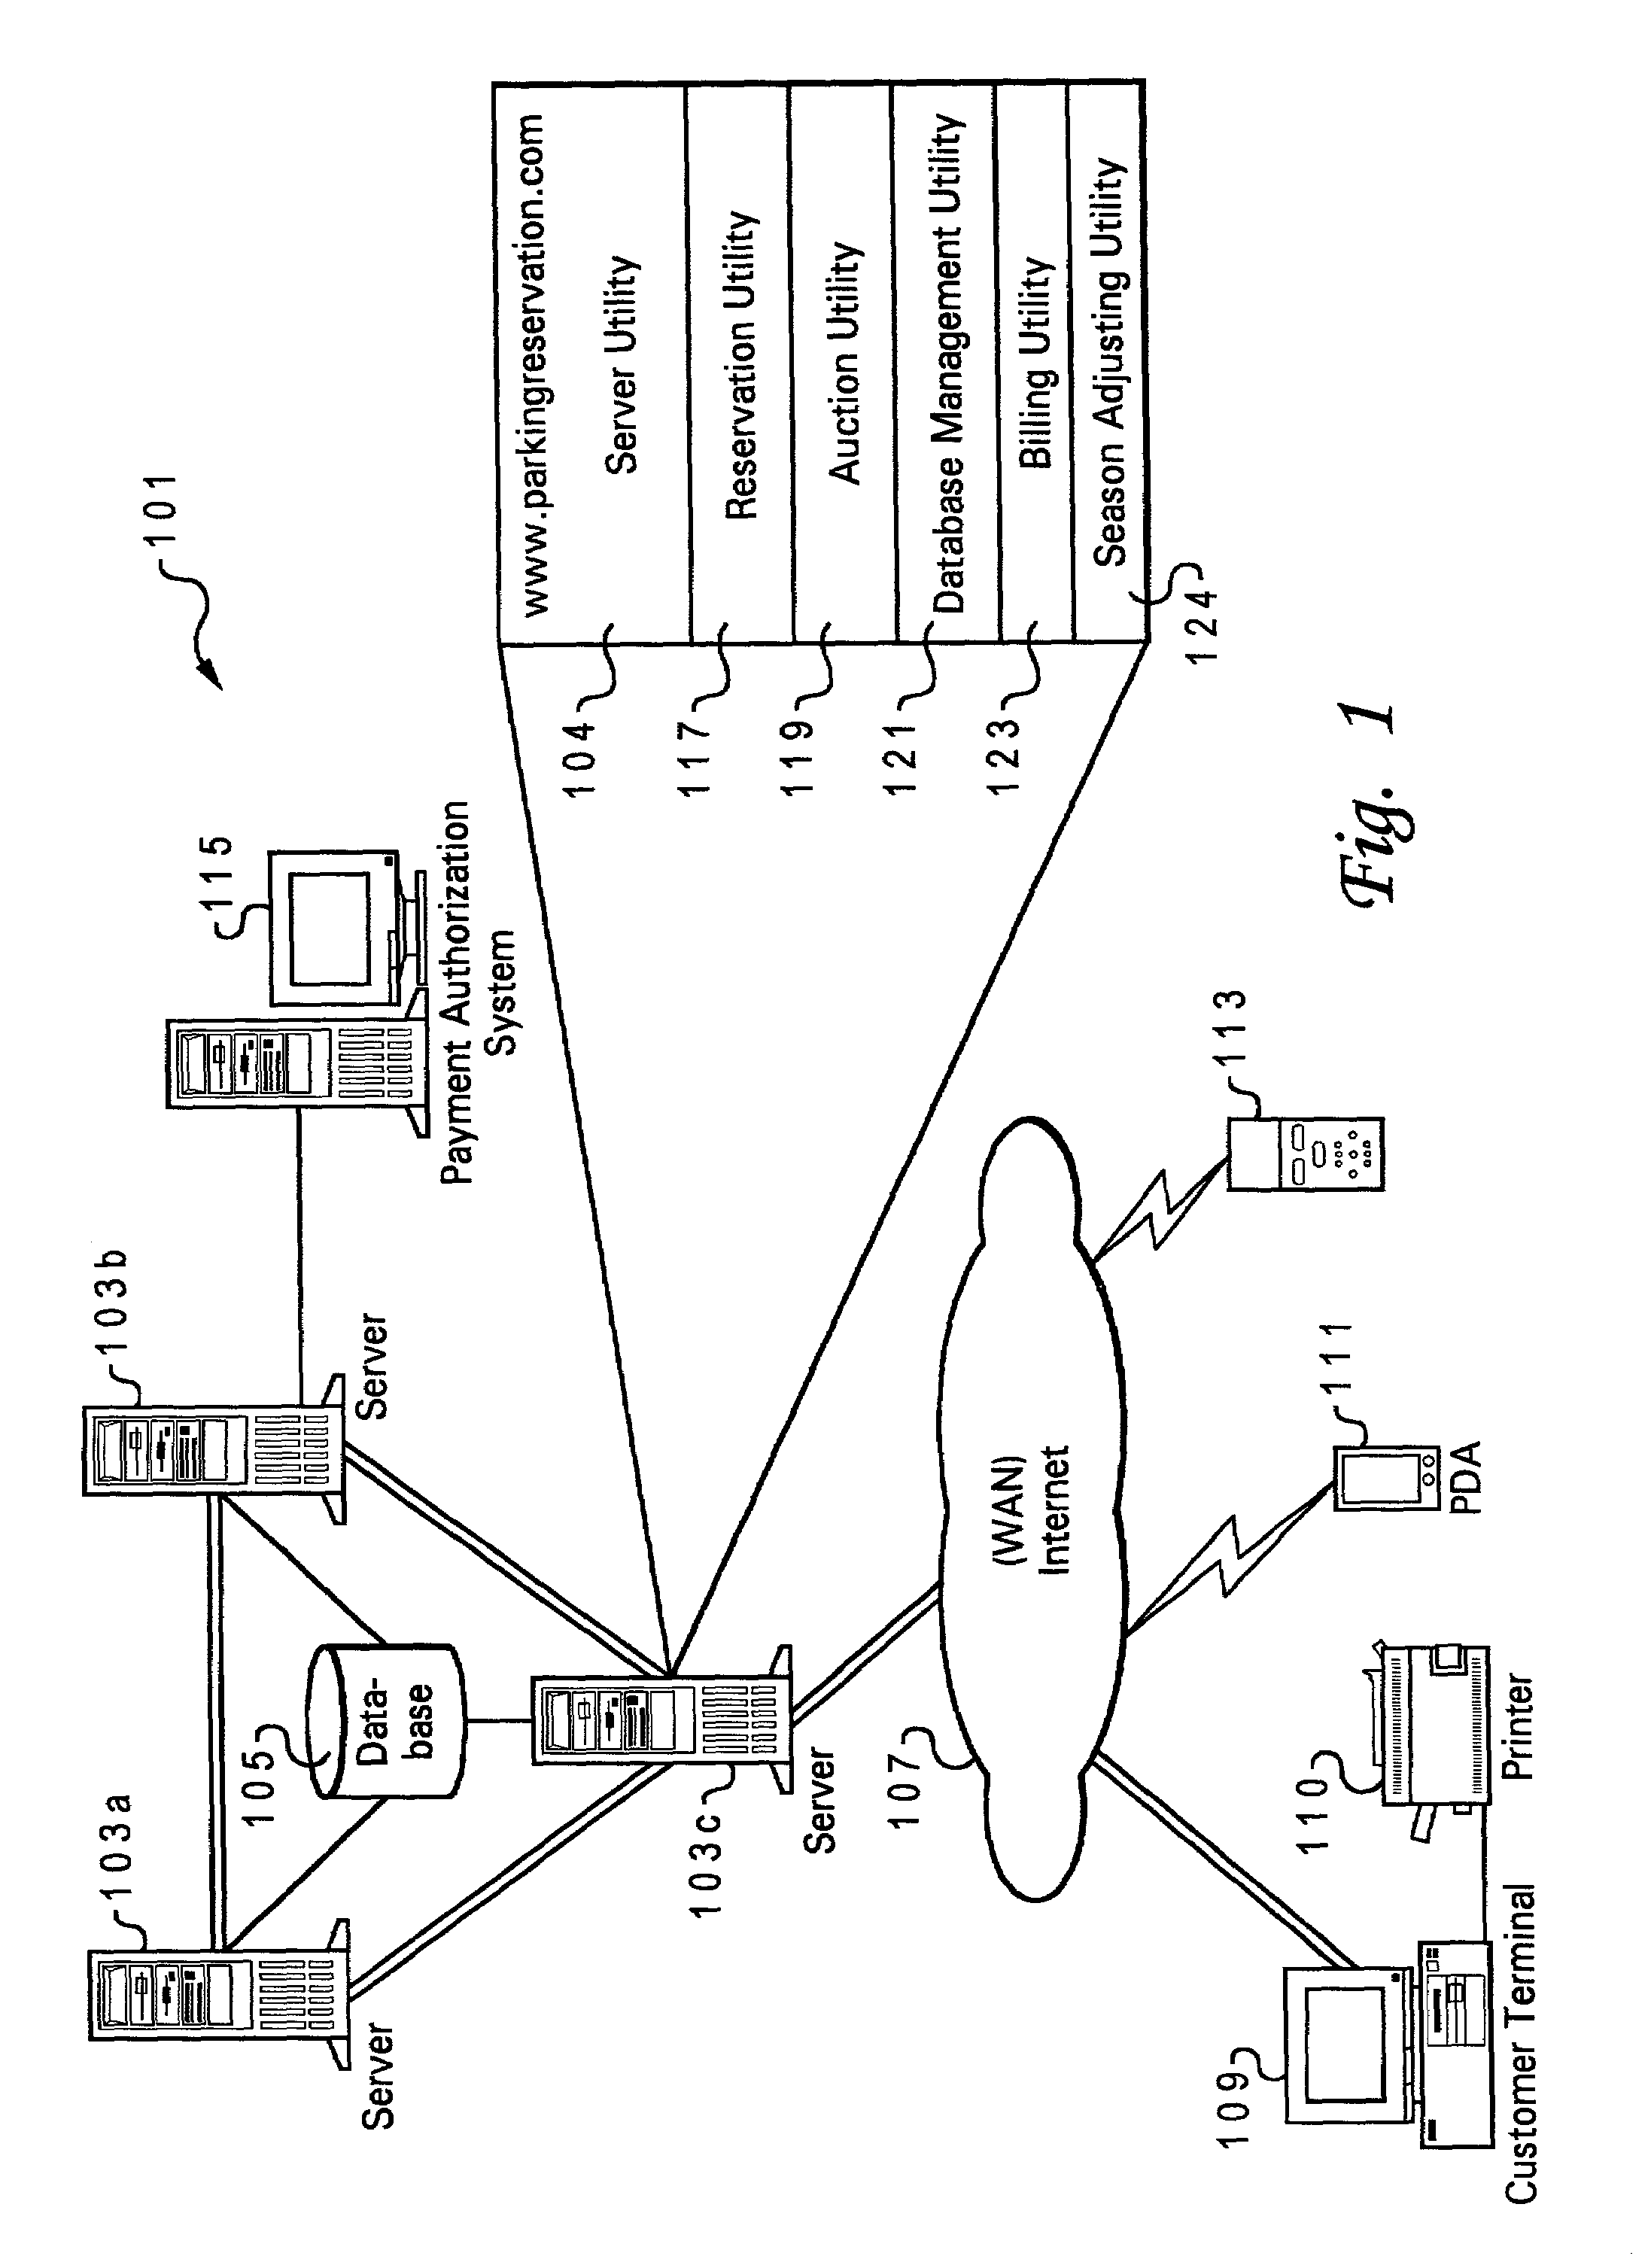 Method and systems for space reservation on parking lots with mechanisms for space auctioning, over-booking, reservation period extensions, and incentives